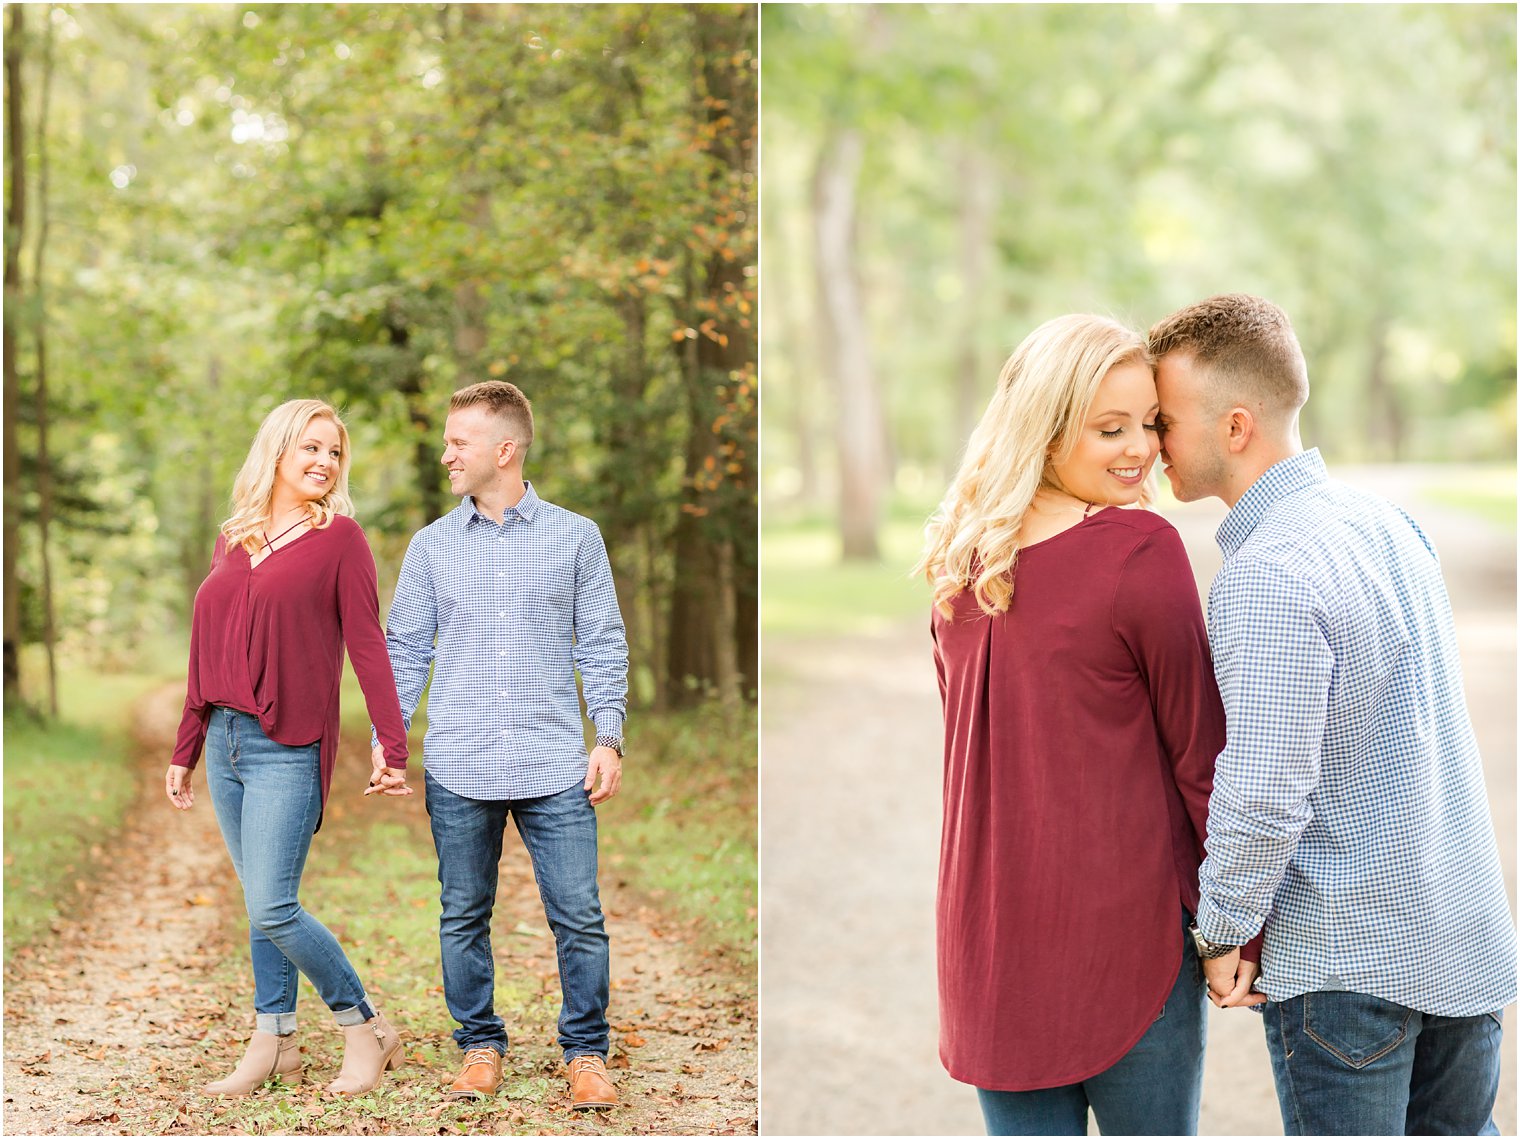 Casual engagement photos